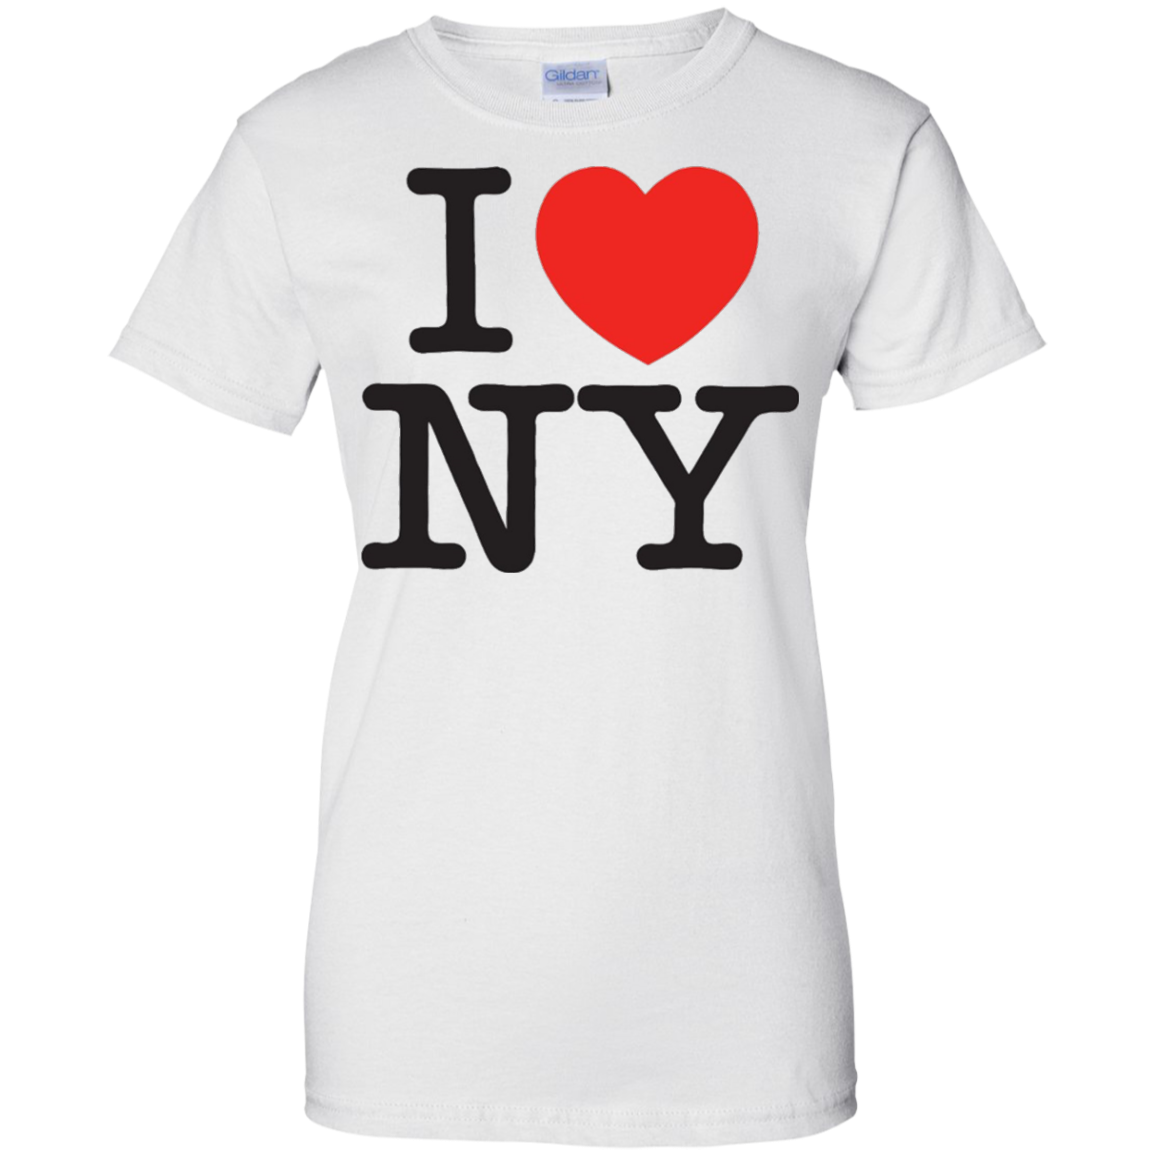 I Love Ny Exclusive Tee Shirt Design Online